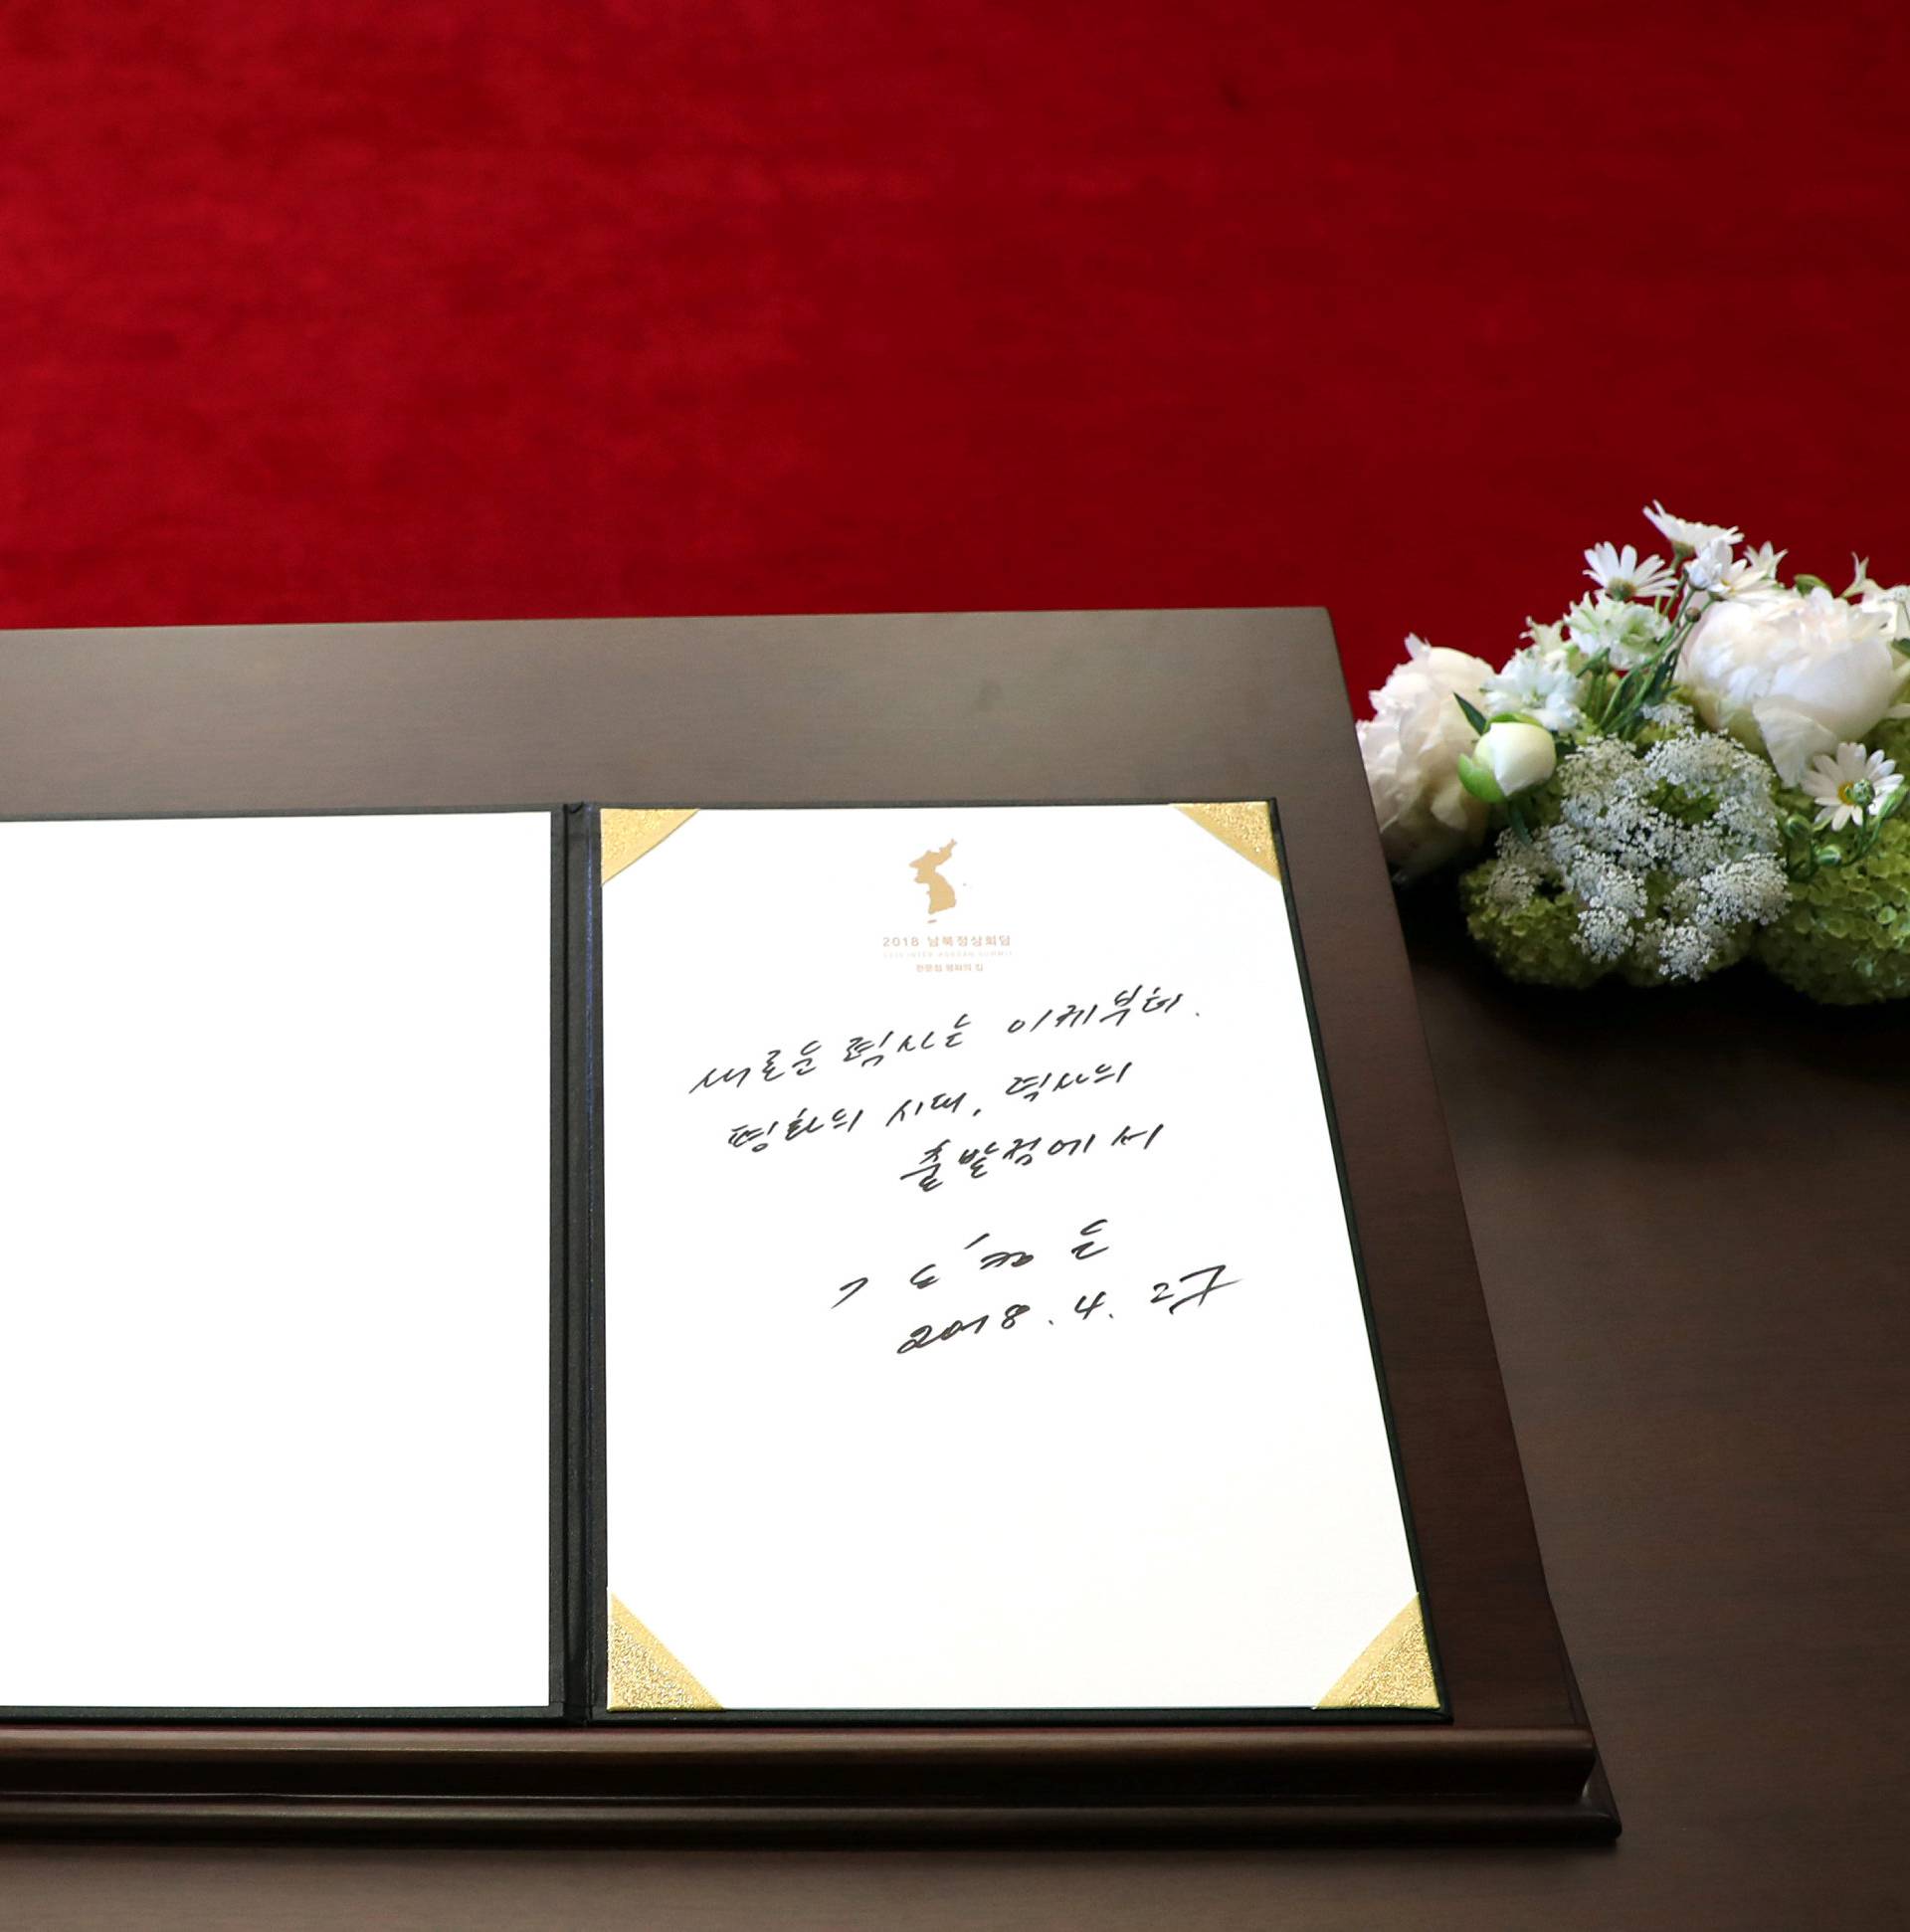 North Korean leader Kim Jong Un's entry in a guestbook is seen at the Peace House